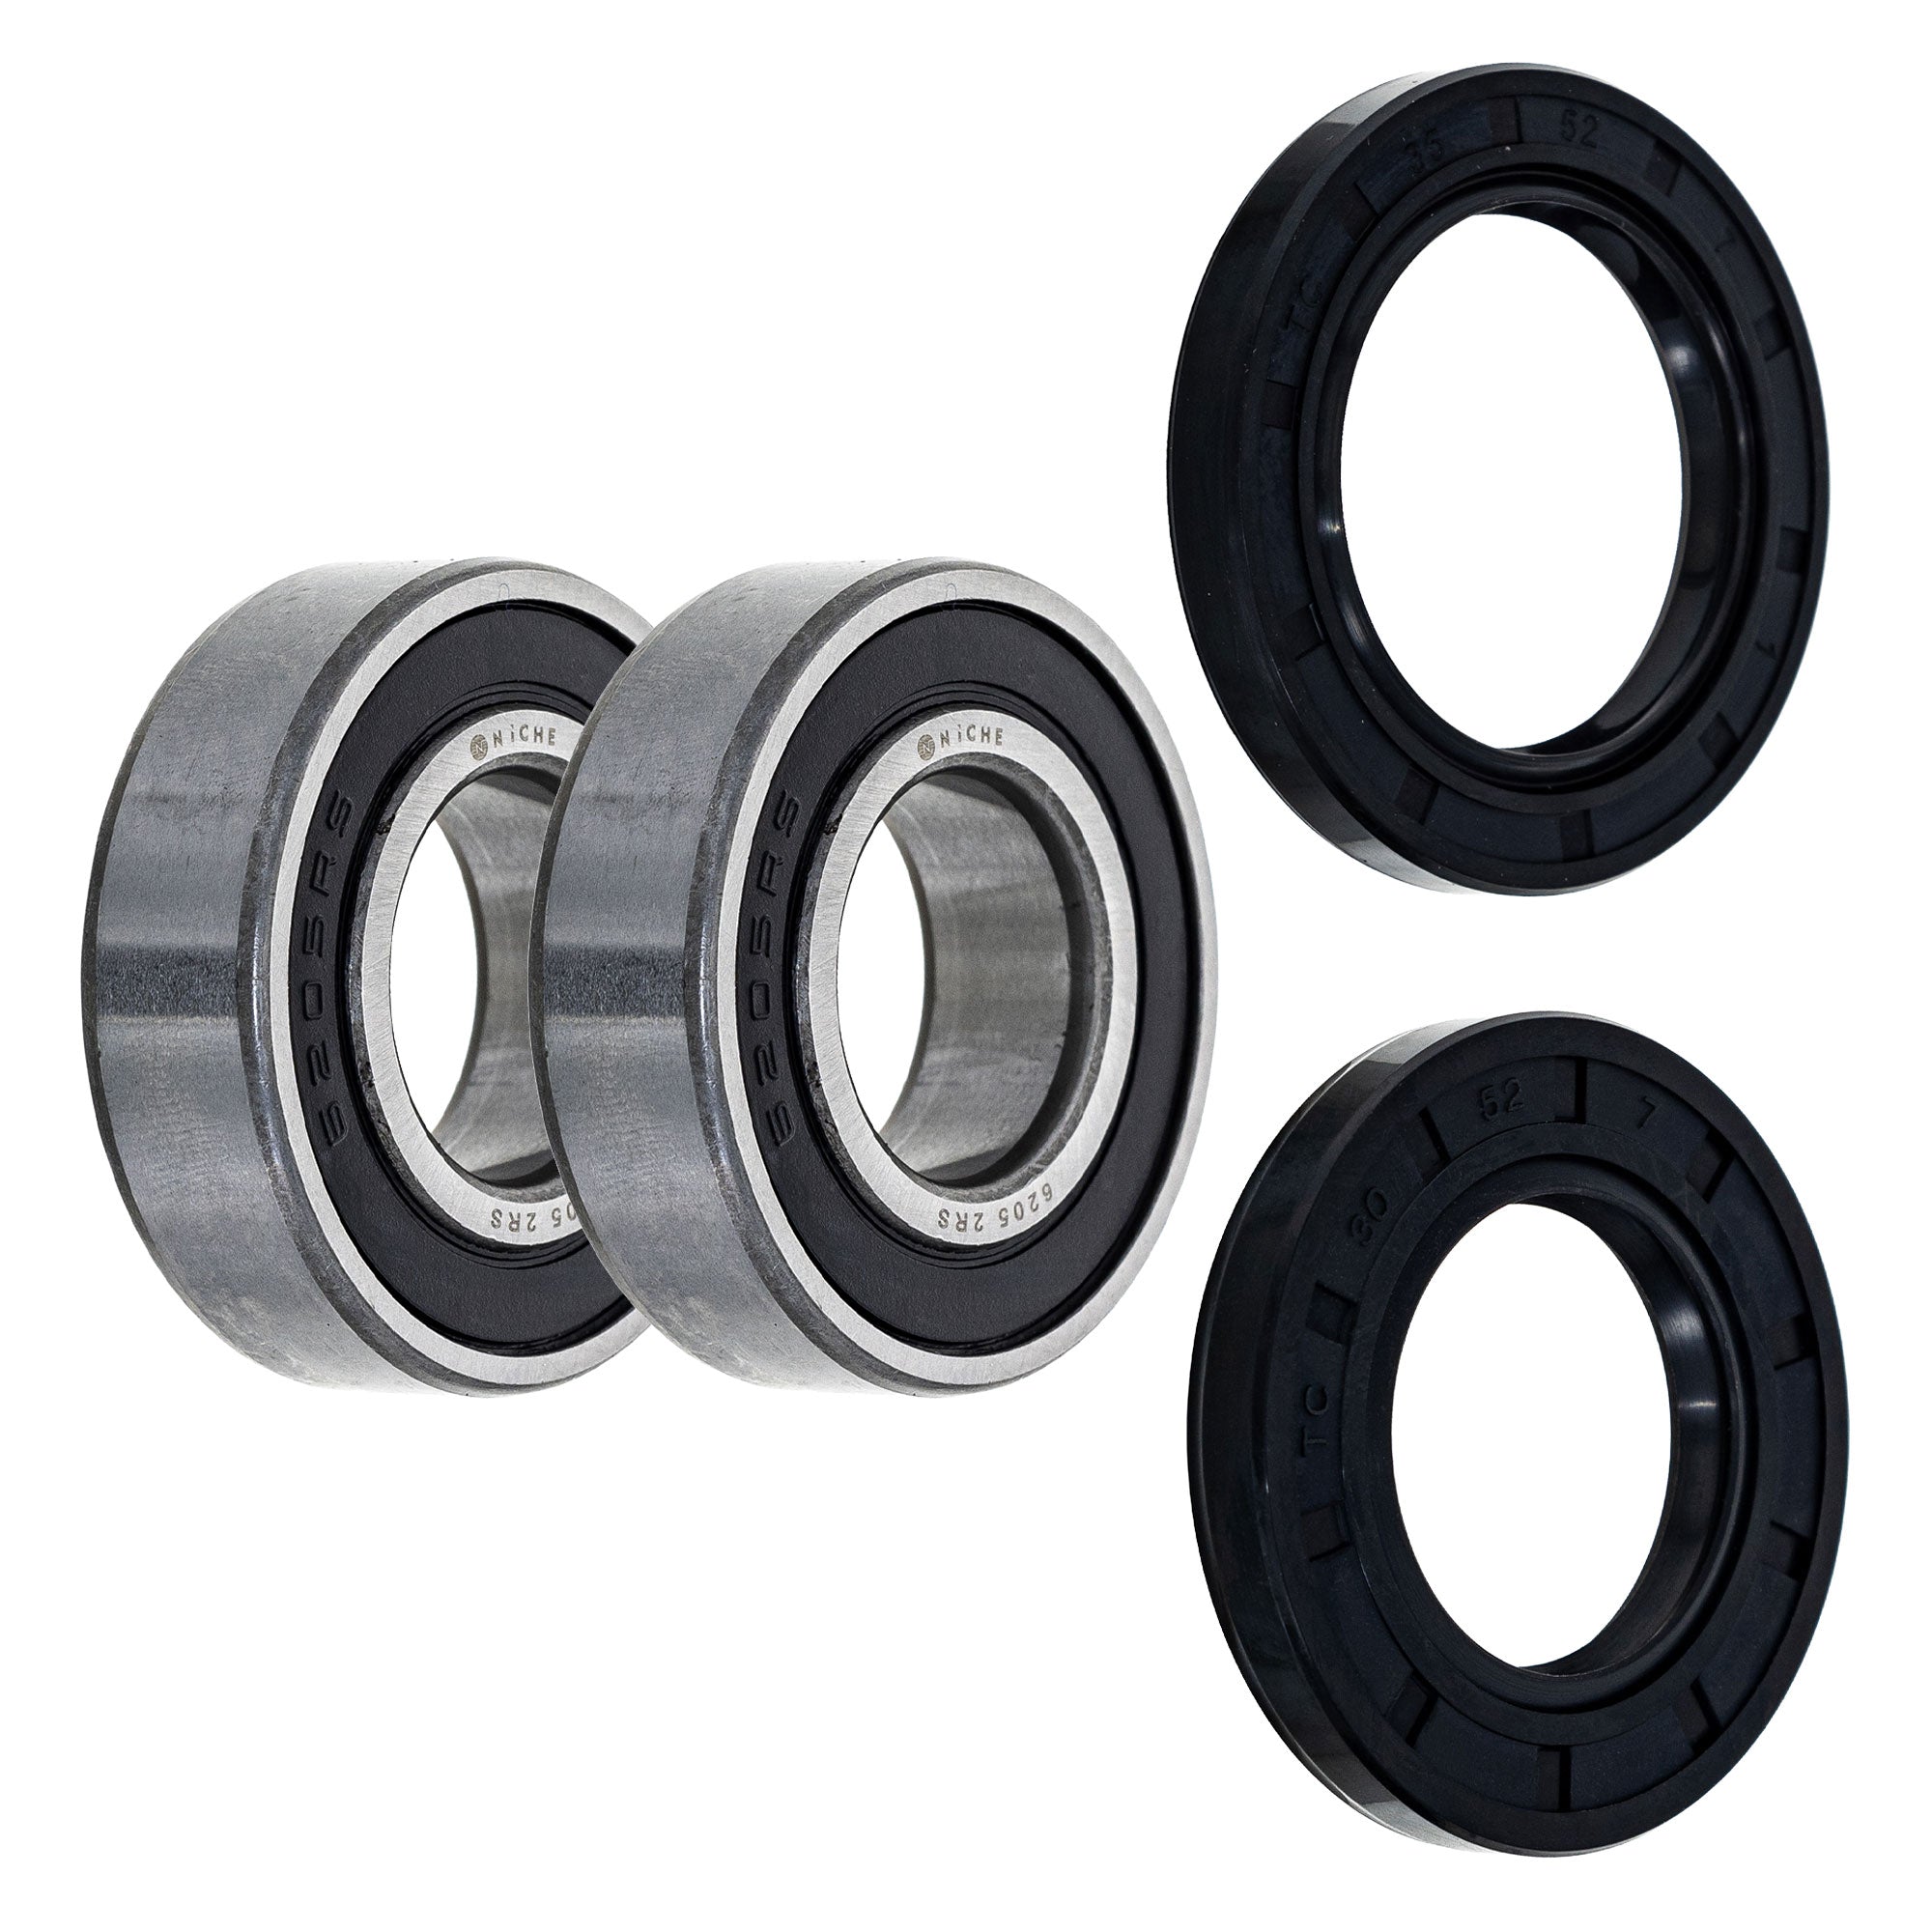 Wheel Bearing Seal Kit for zOTHER Ref No R900RT R1200ST R1200RT R1200R NICHE MK1009020